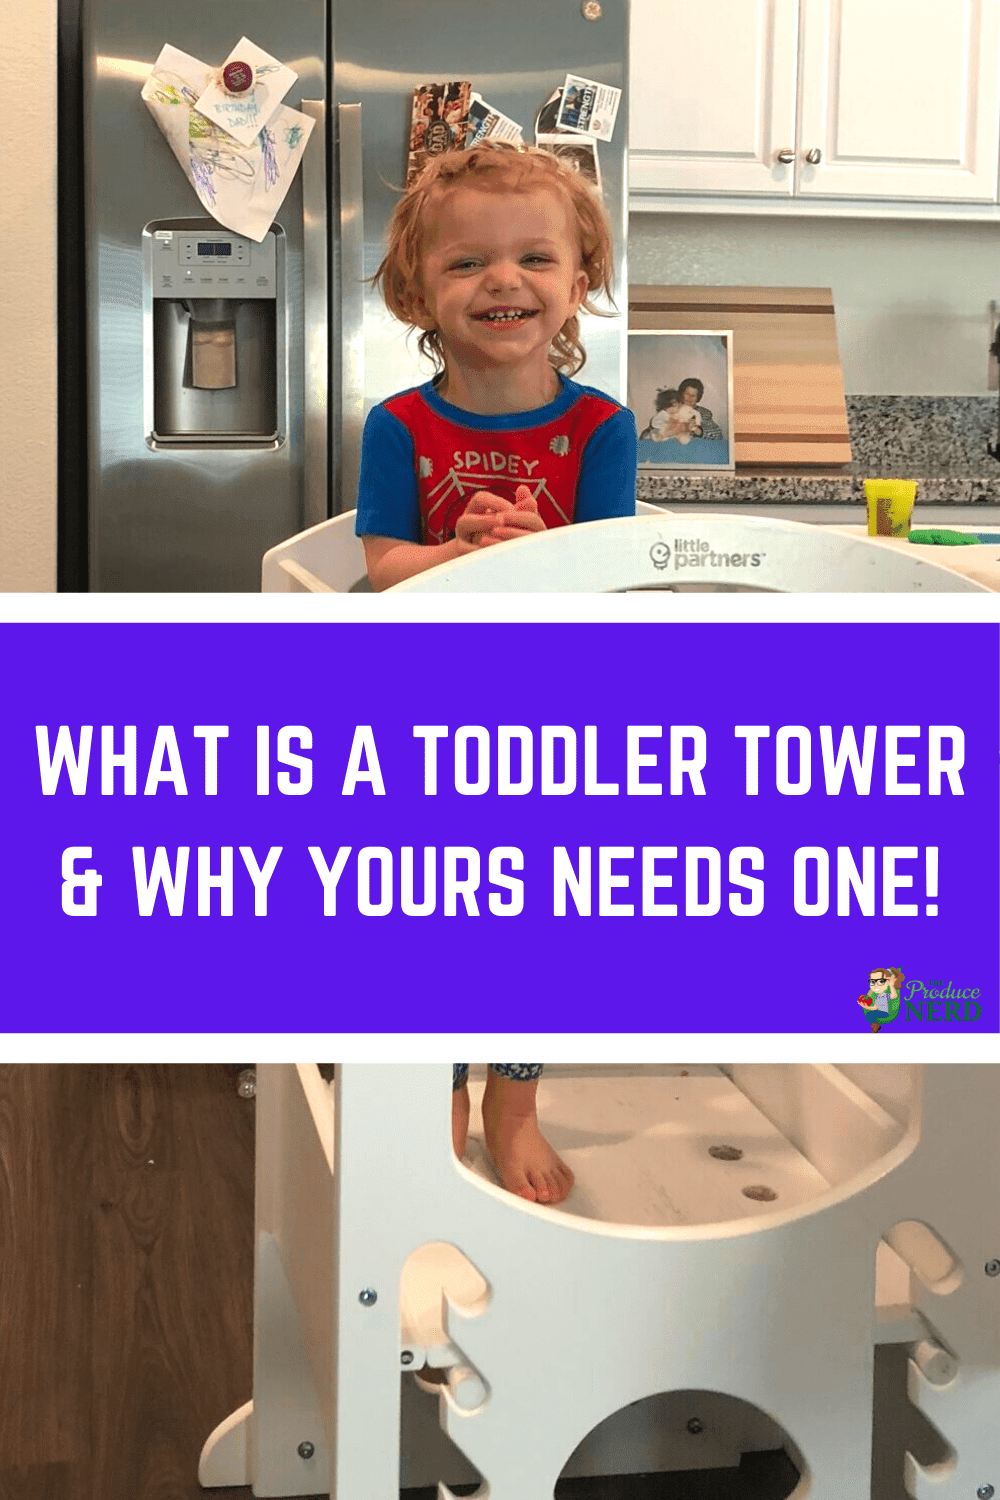 You are currently viewing What is a Toddler Tower & Why Your Toddler Needs One!